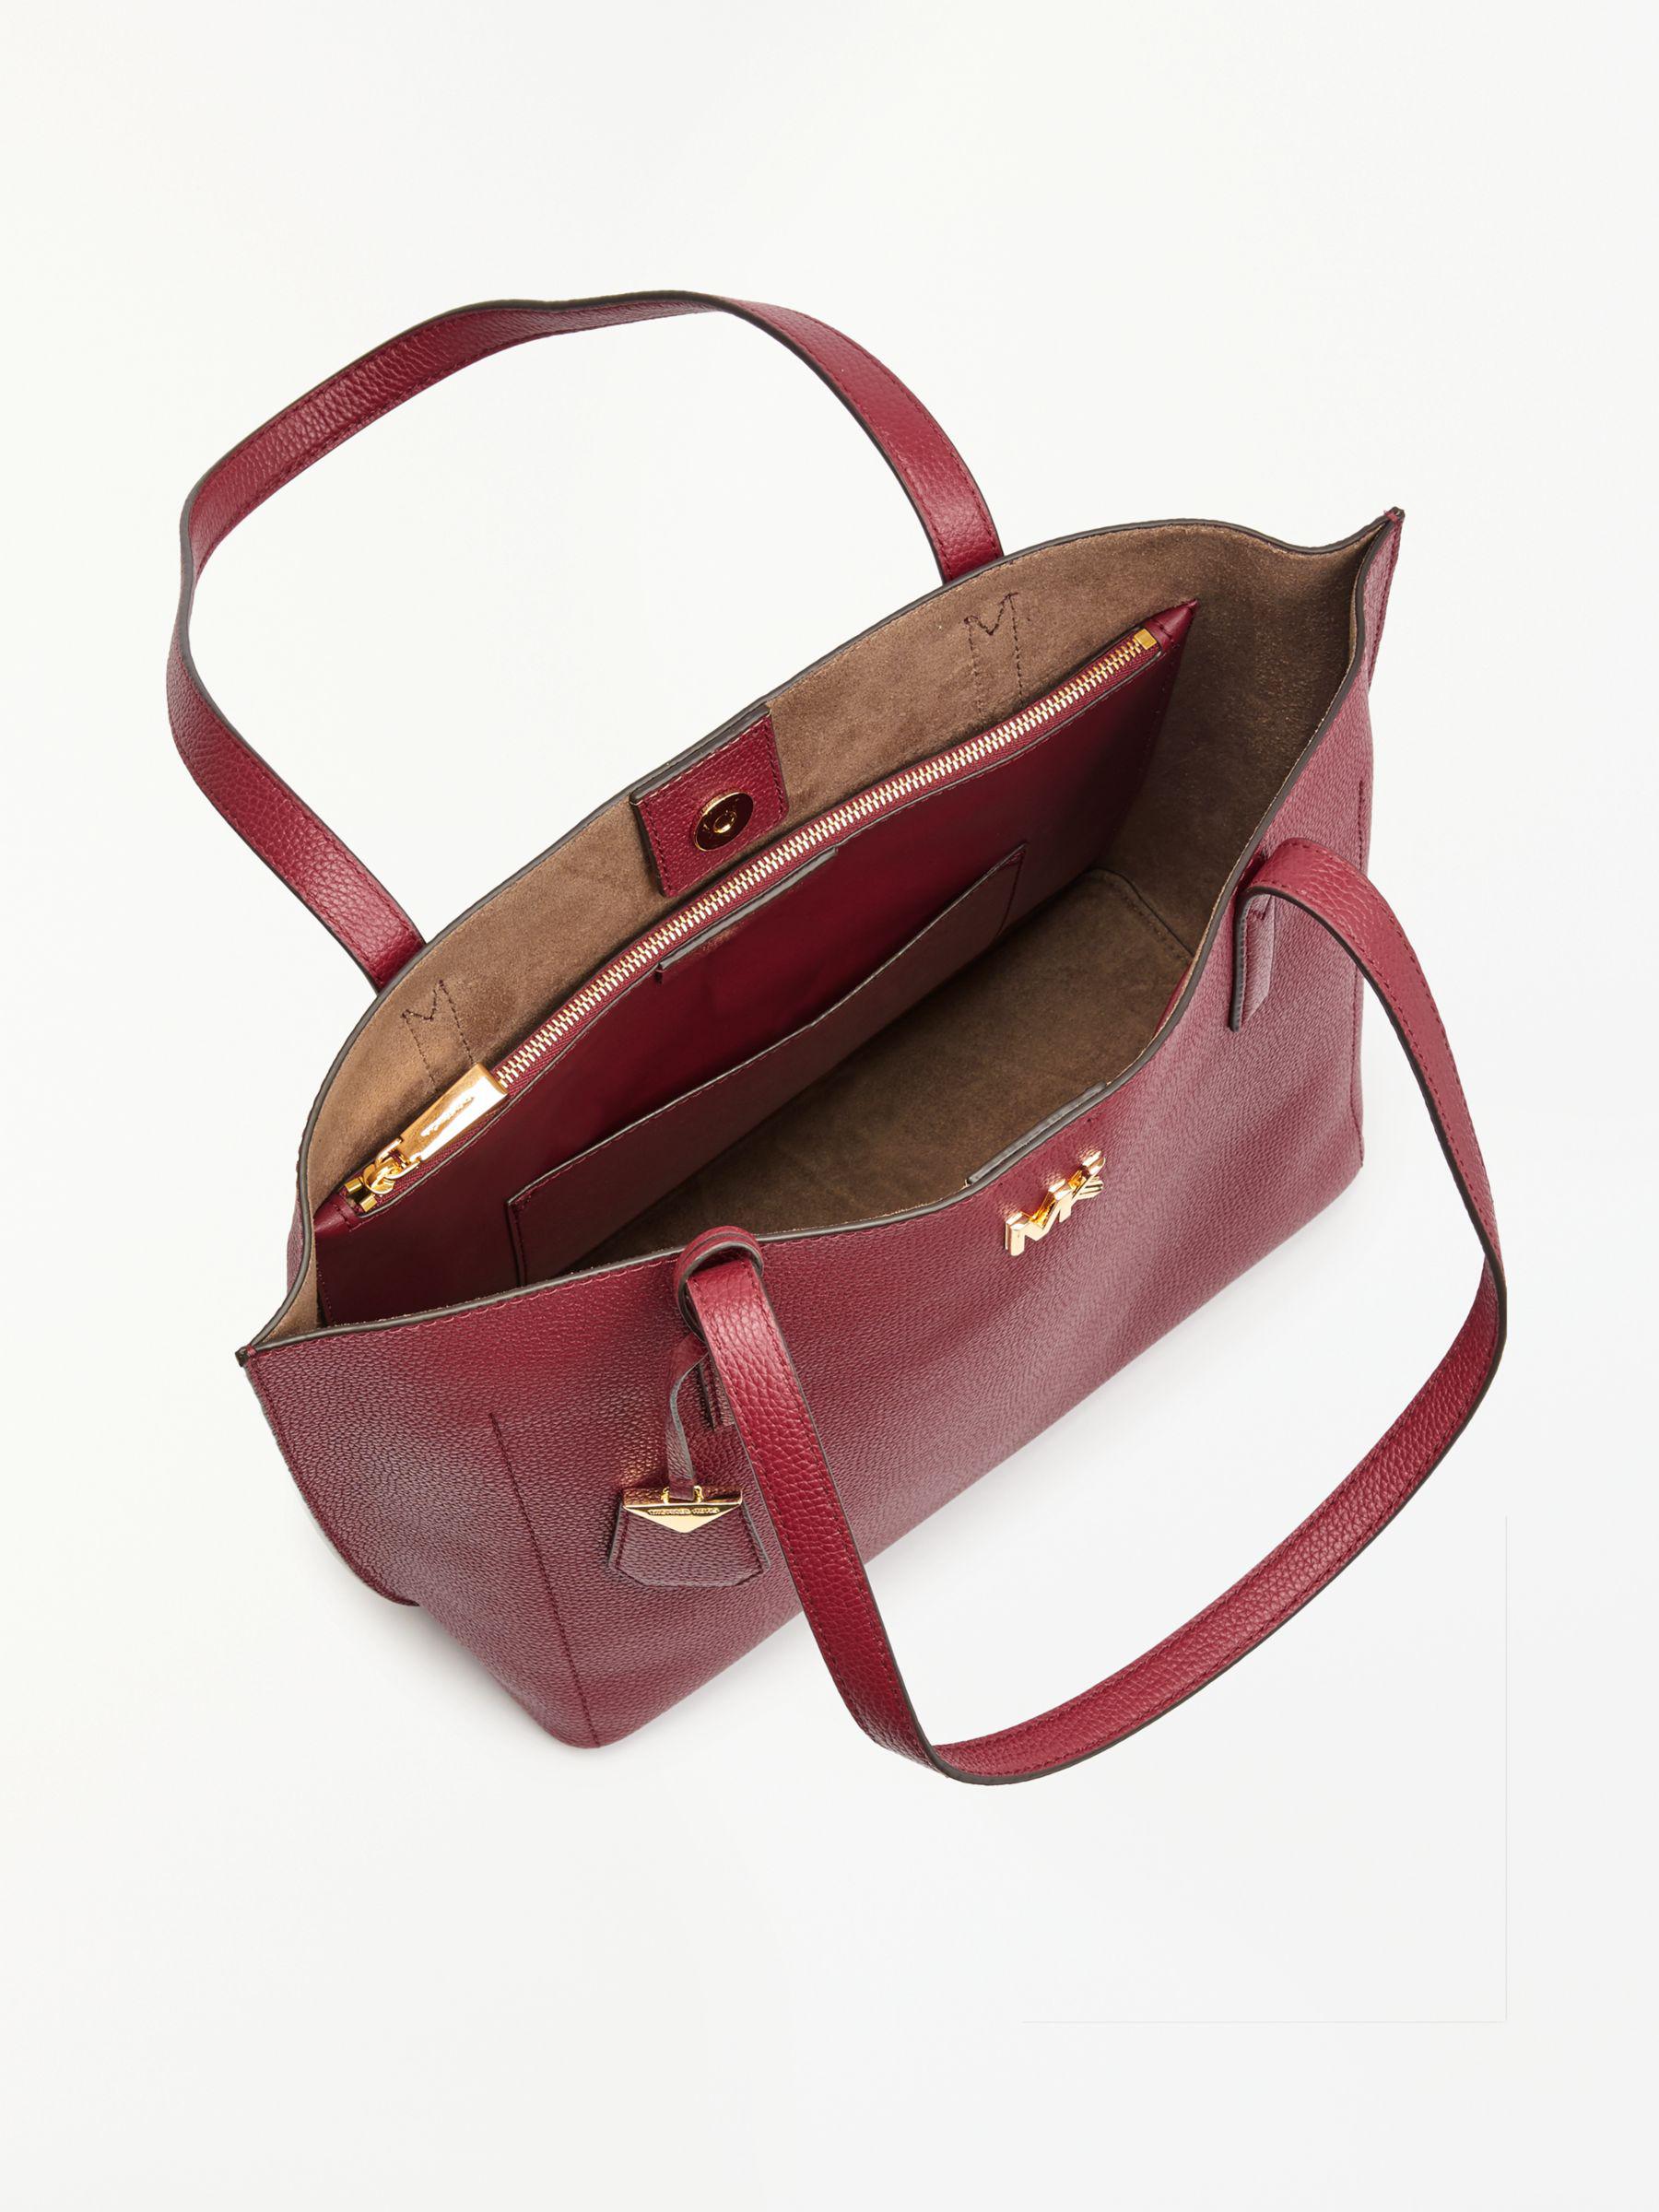 ana bonded leather tote